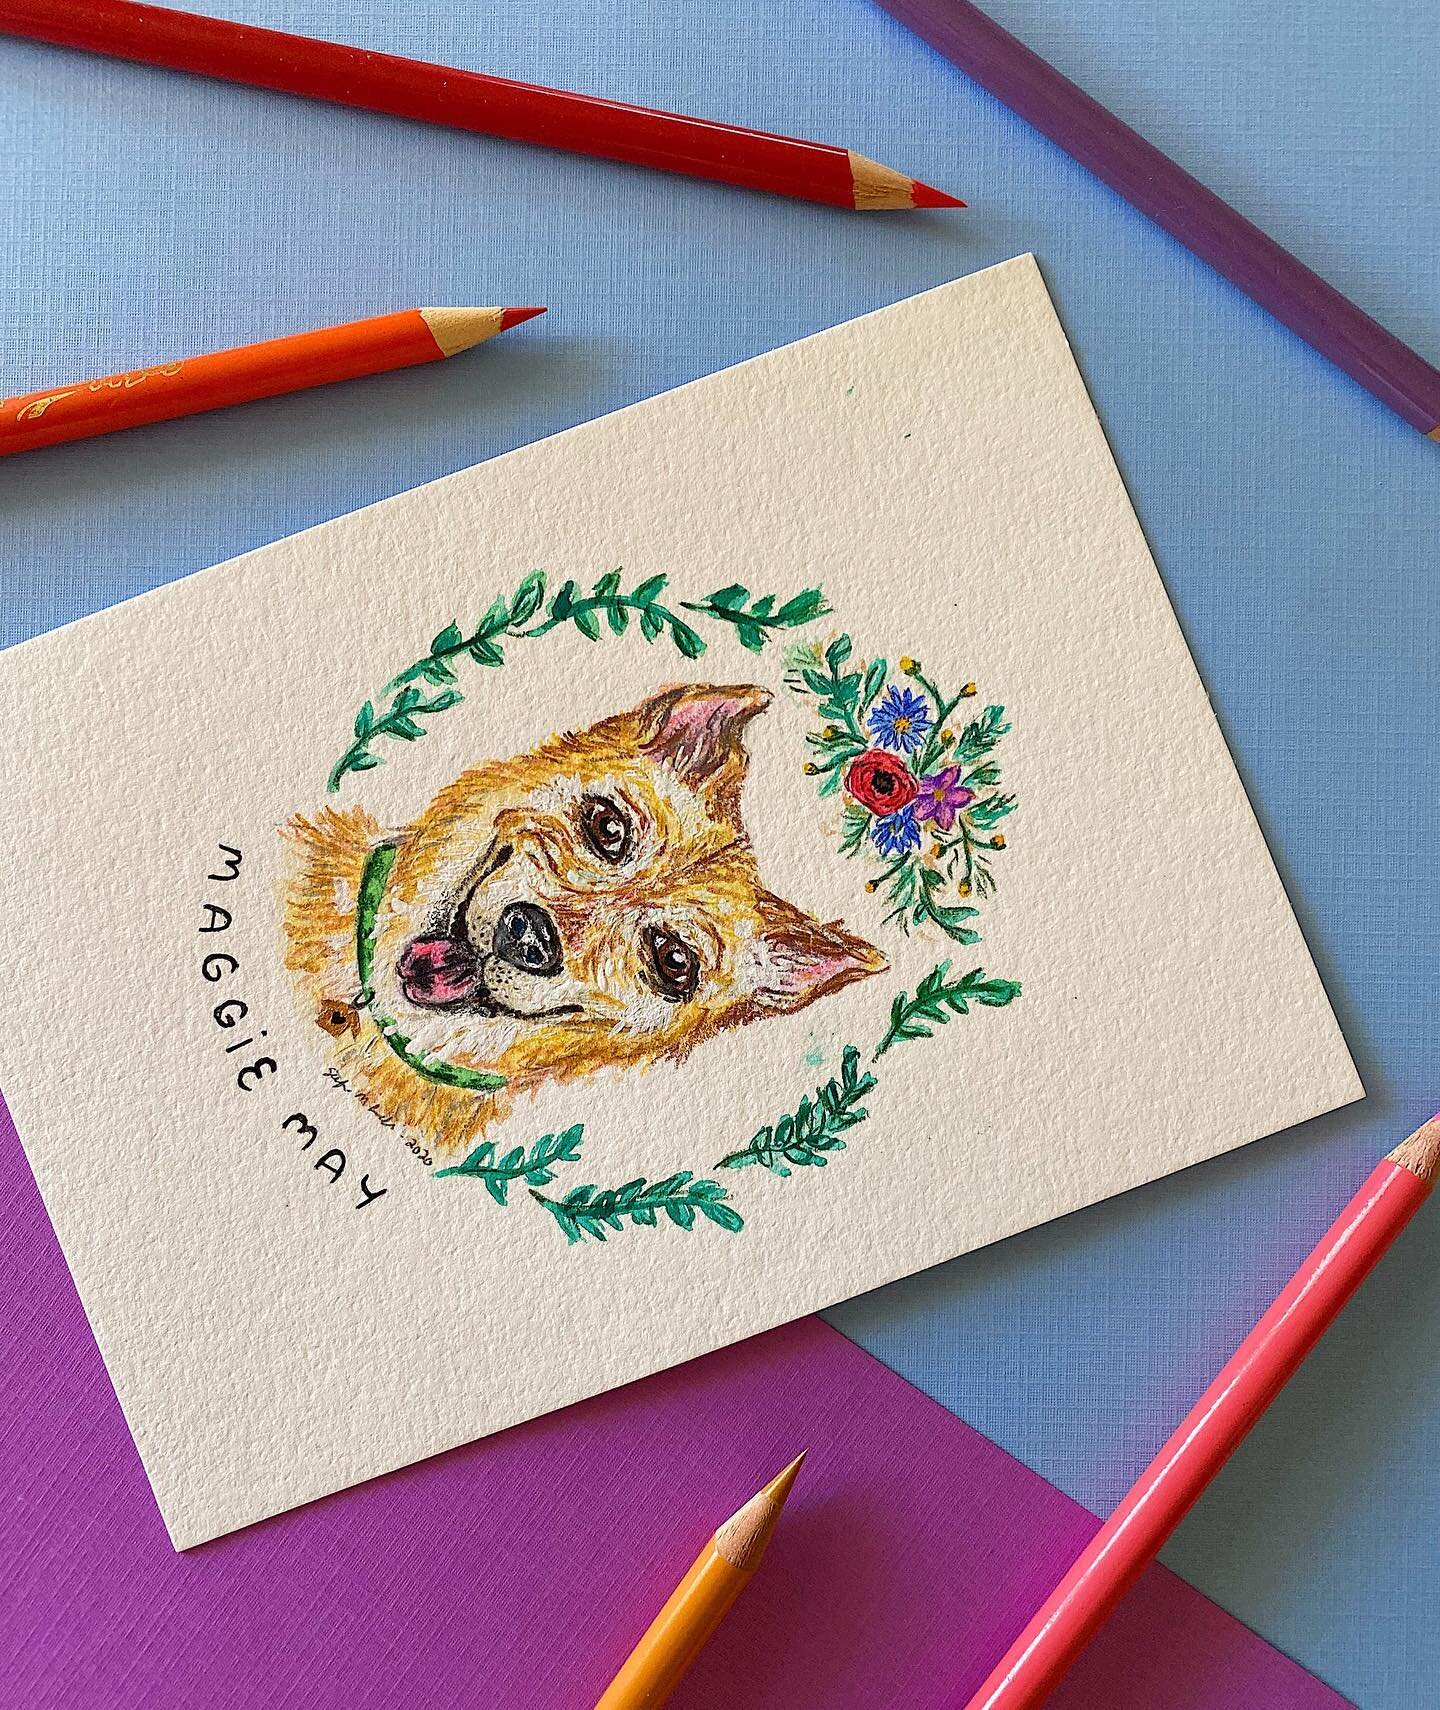 Happy Friday lovelies. This is another Christmas commission I completed for a friend (thanks Mel!) ❤️ I really enjoy pet portraits, and I used gouache and colored pencils for Maggie here (I can do digital as well)
.
The kicker? I was a major dingus a